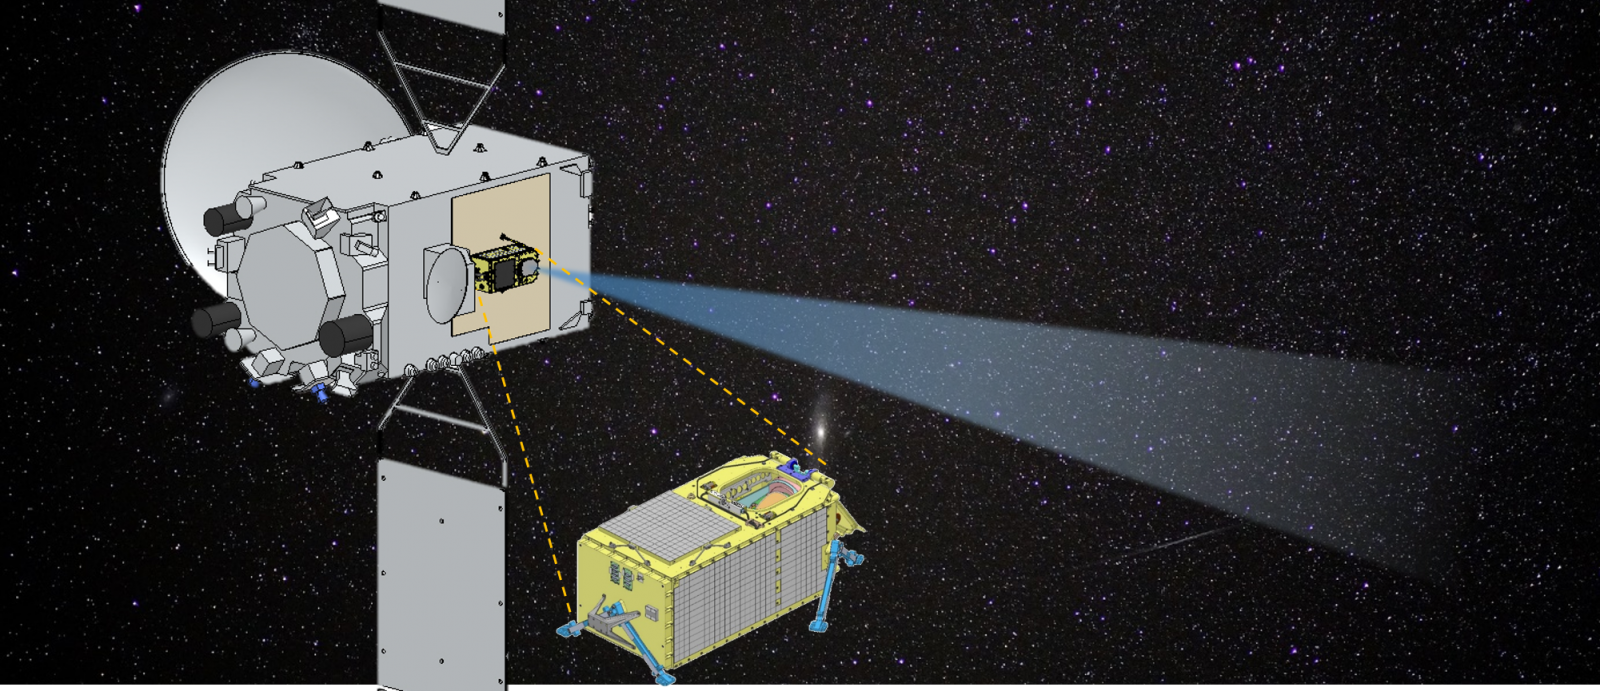 Deployed into the geosynchronous belt, the Japanese satellite QZSS, which carries an optical payload (QZSS-HP) developed by Lincoln Laboratory, will monitor objects in that region of space.